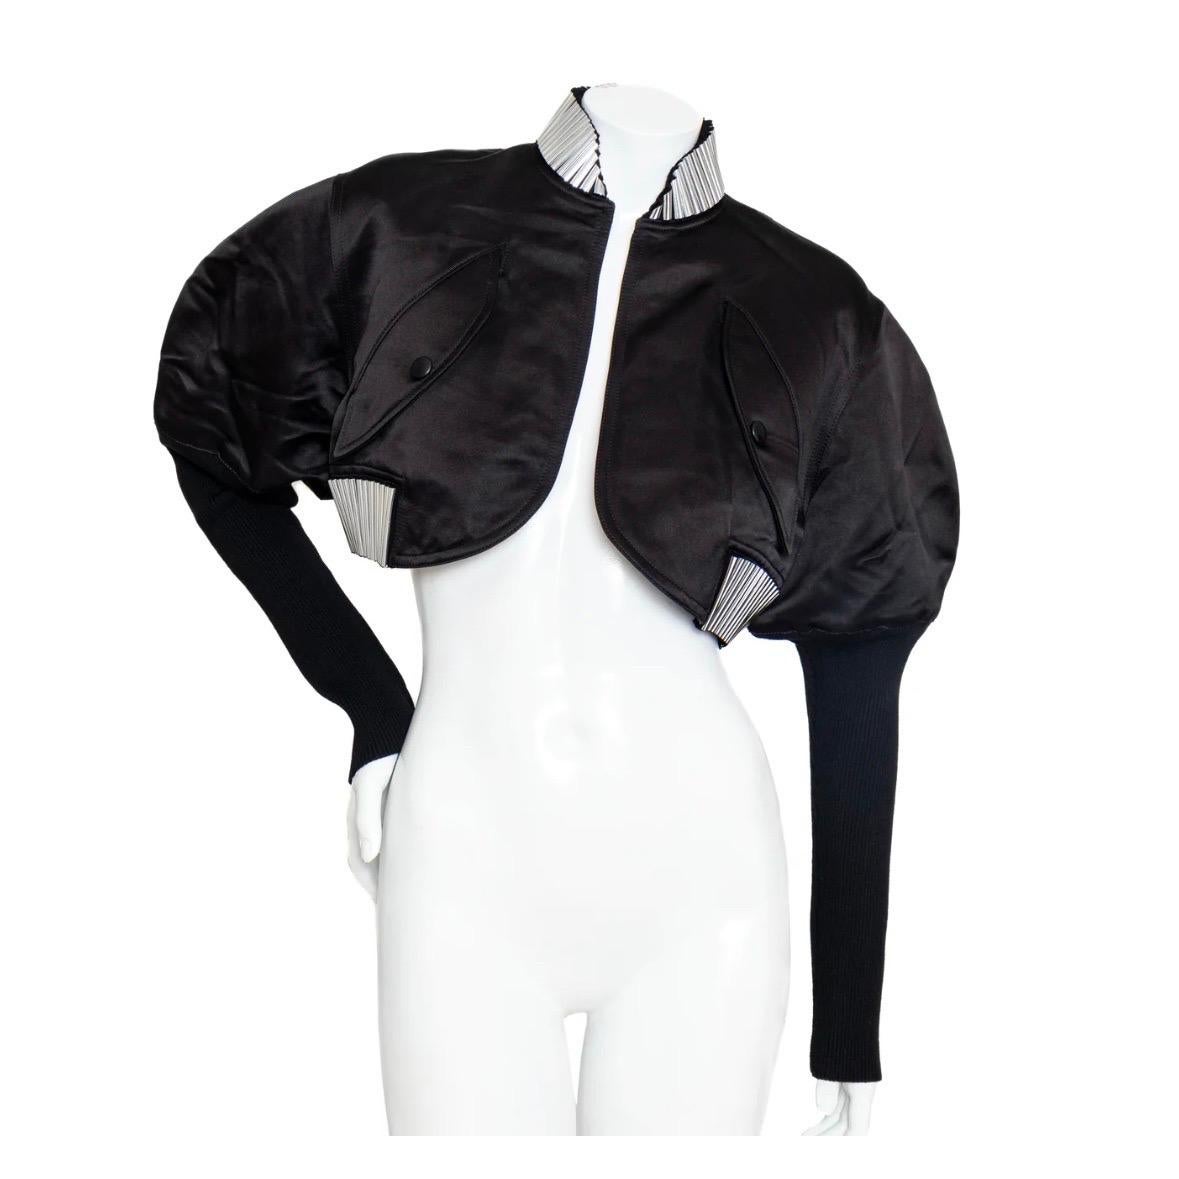 Louis Vuitton Puff Sleeve Bomber Jacket
Circa 2019; limited
Iconic Nicolas Ghesquière silhouette
Cropped bomber jacket
Silver-tone tube trim on collar and hem
Tight knitted sleeves
Front flap pockets with snap closure
Classic LV monogram quilted